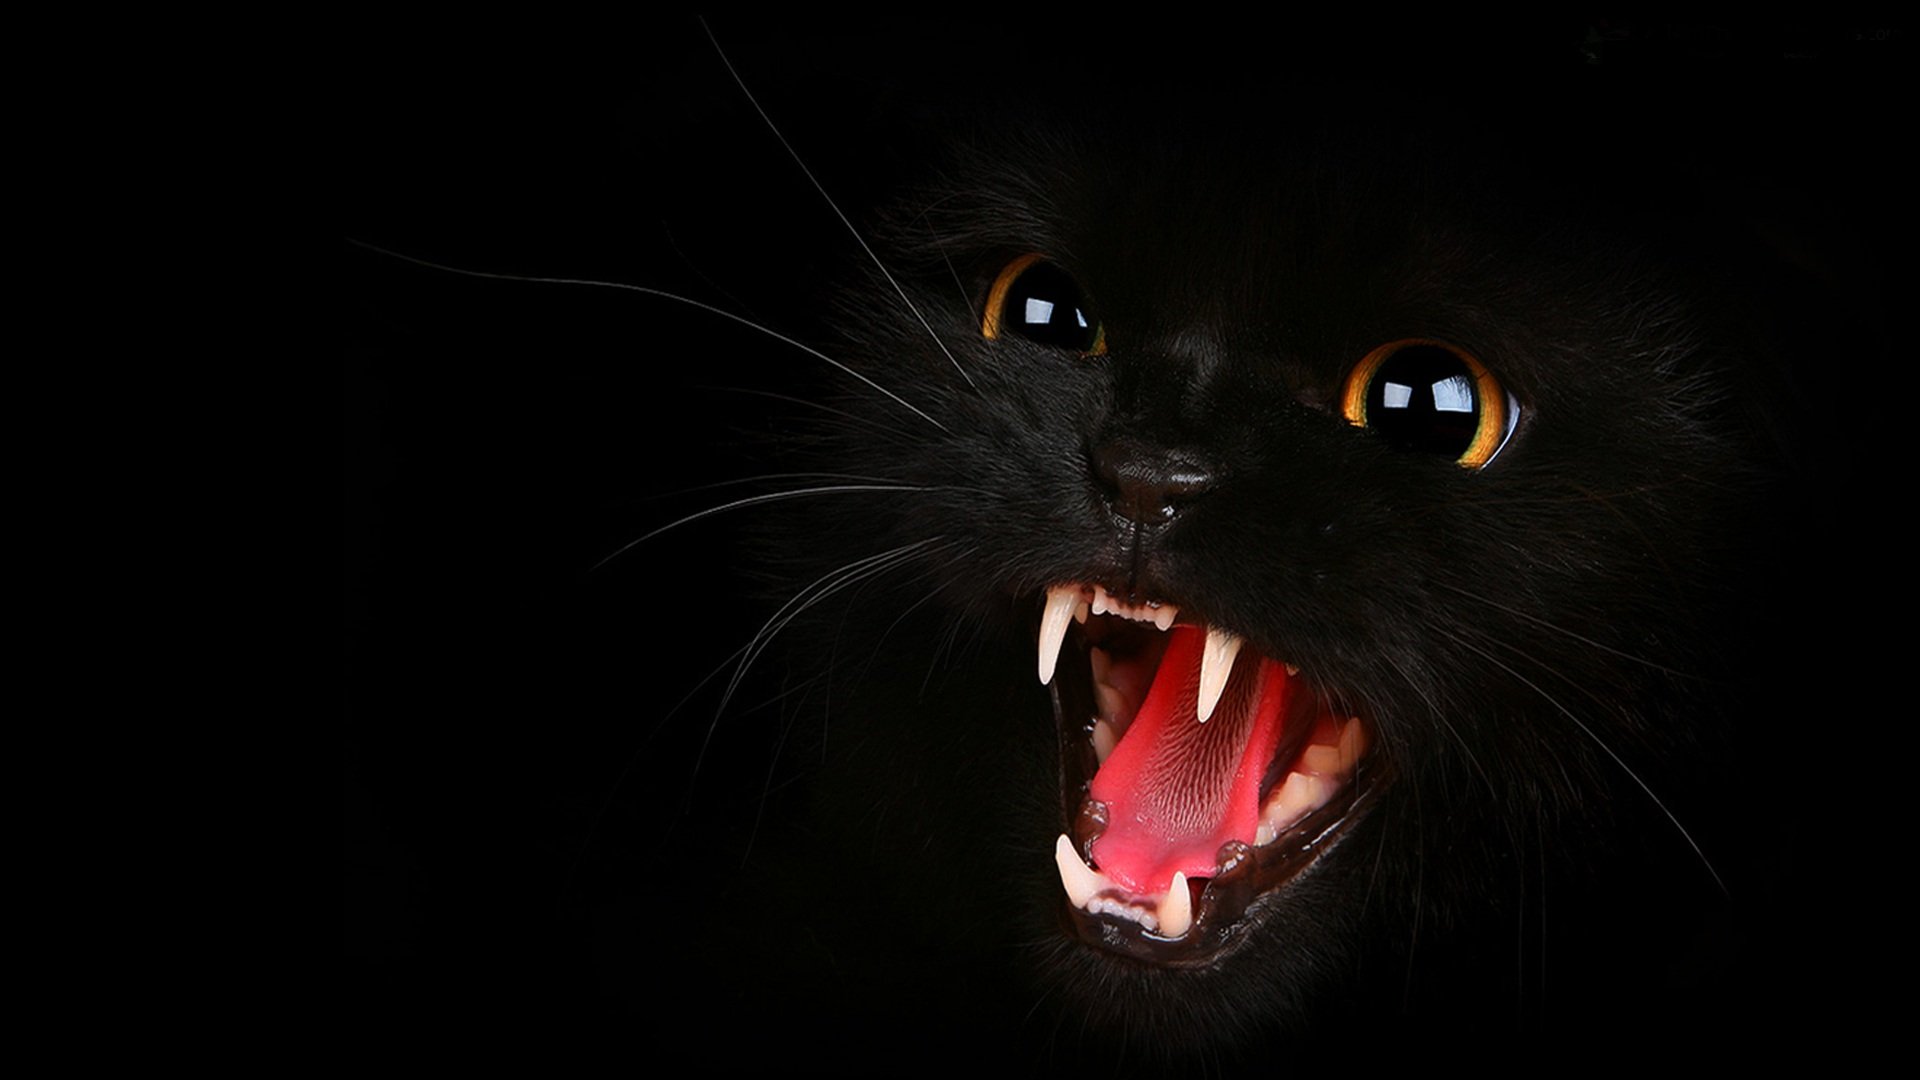 Dark Cats Pattern Wallpaper Images amp Pictures   Becuo 1920x1080